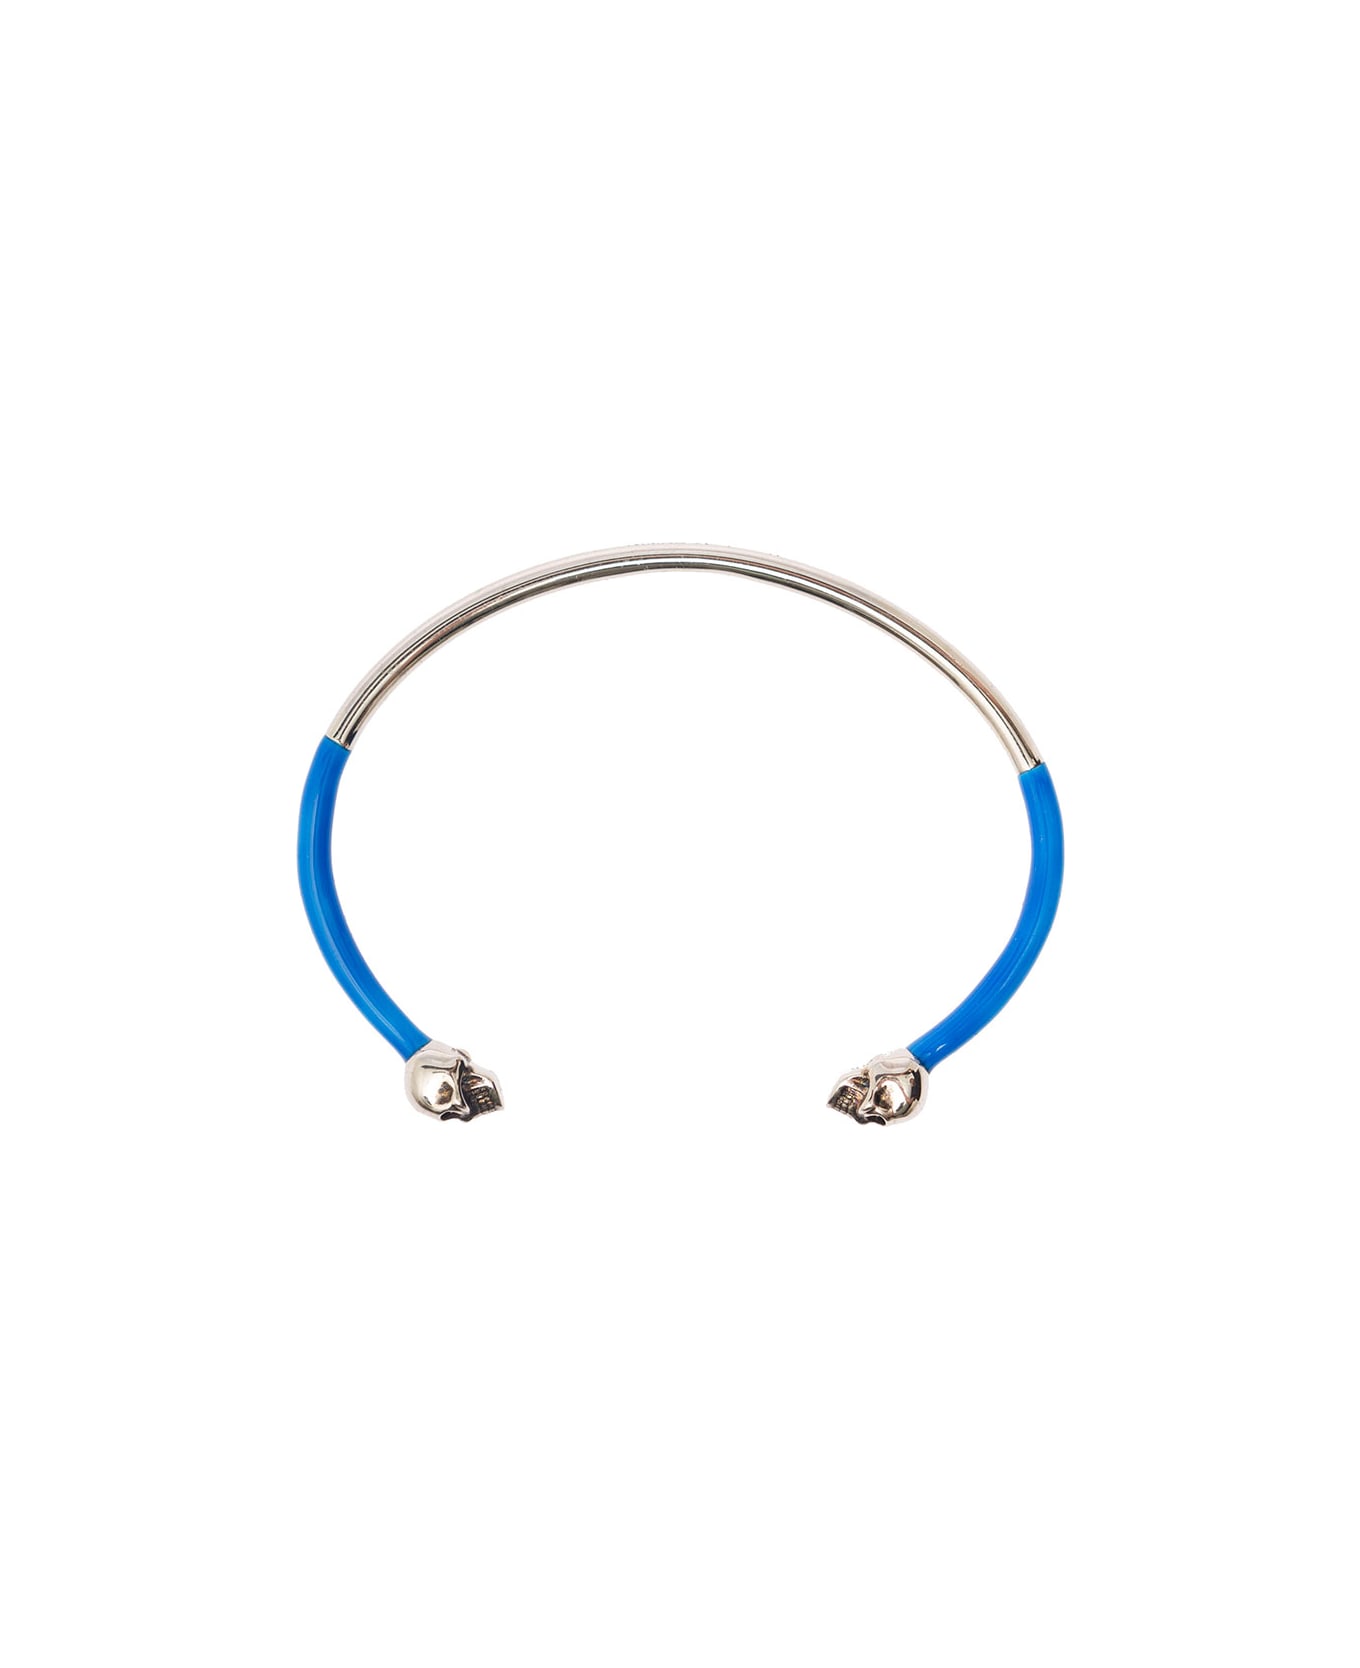 Alexander McQueen Aged Silver And Blue Bangle Bracelet With Sull Details In Brass Man - Blu